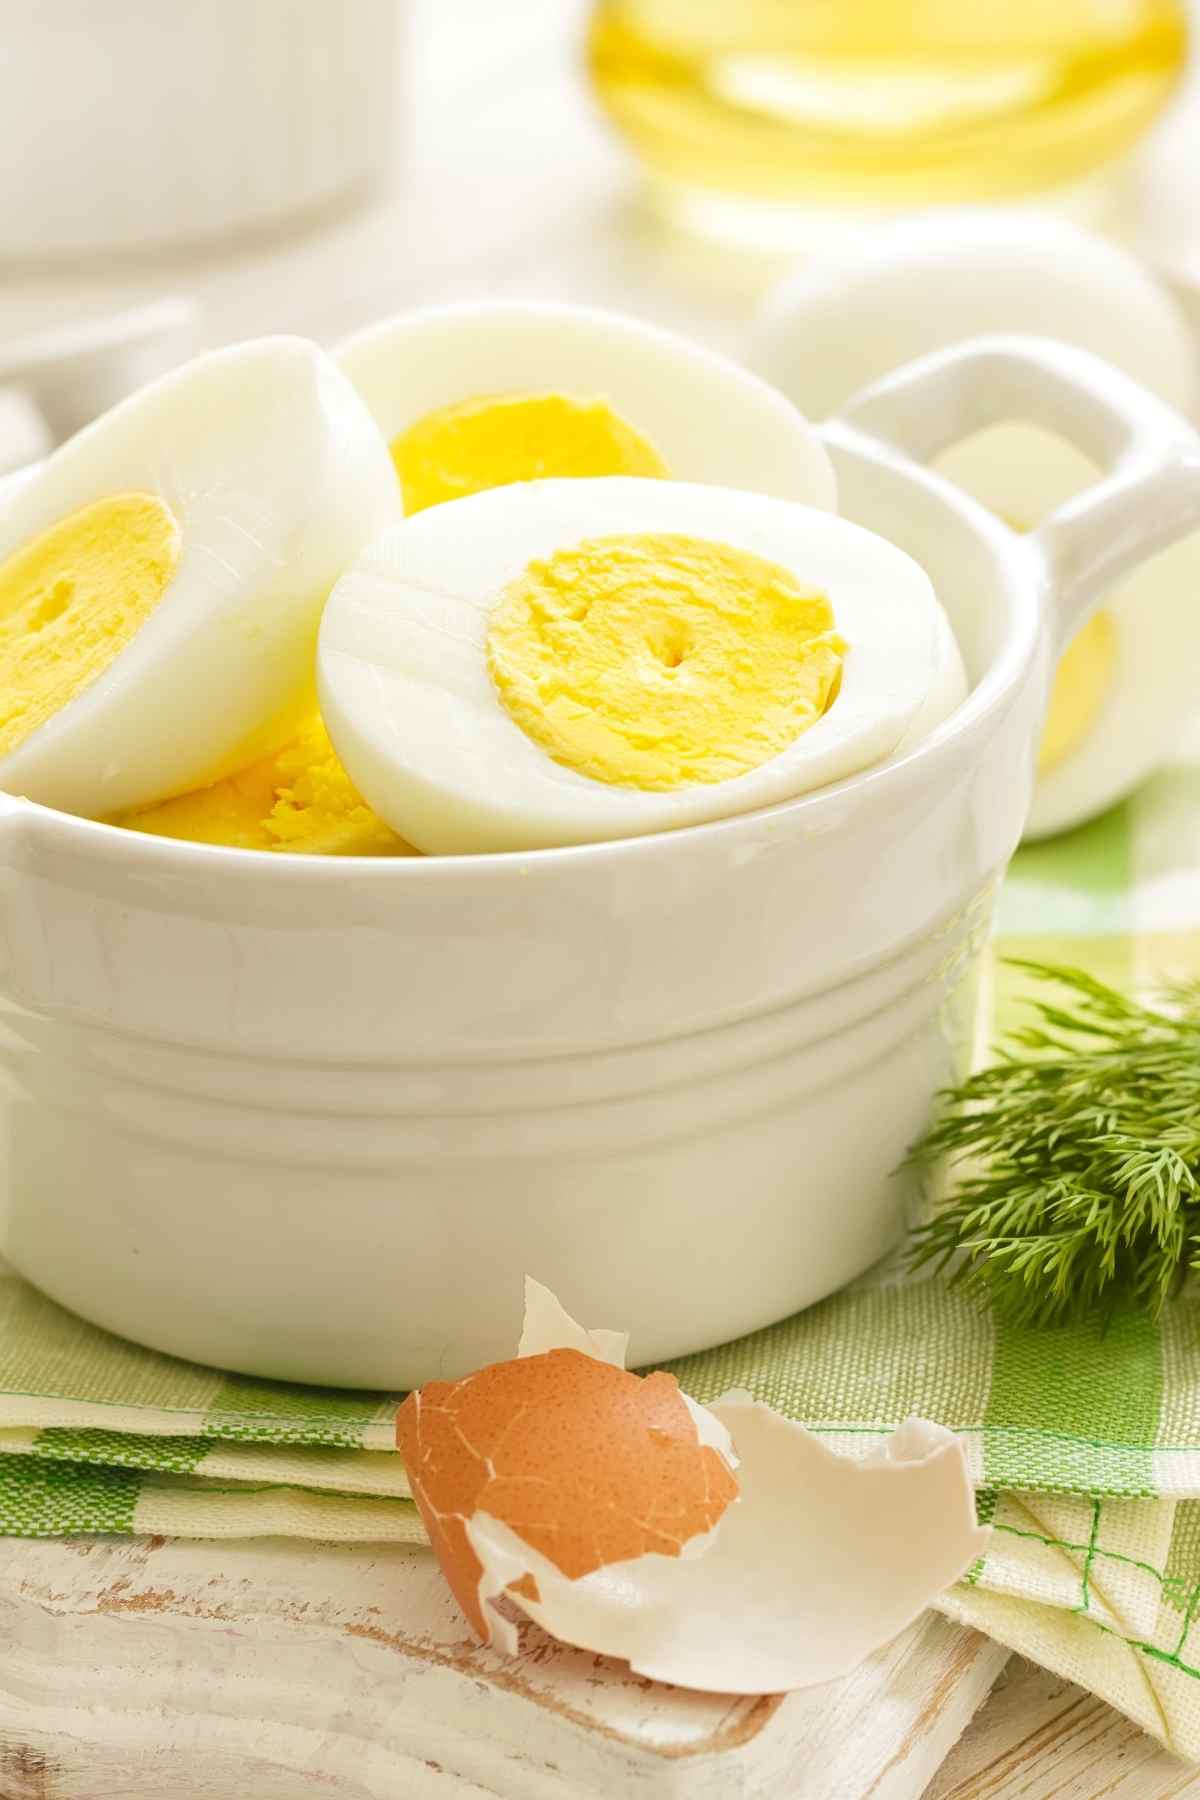 Hard boiled eggs with a firm yolk